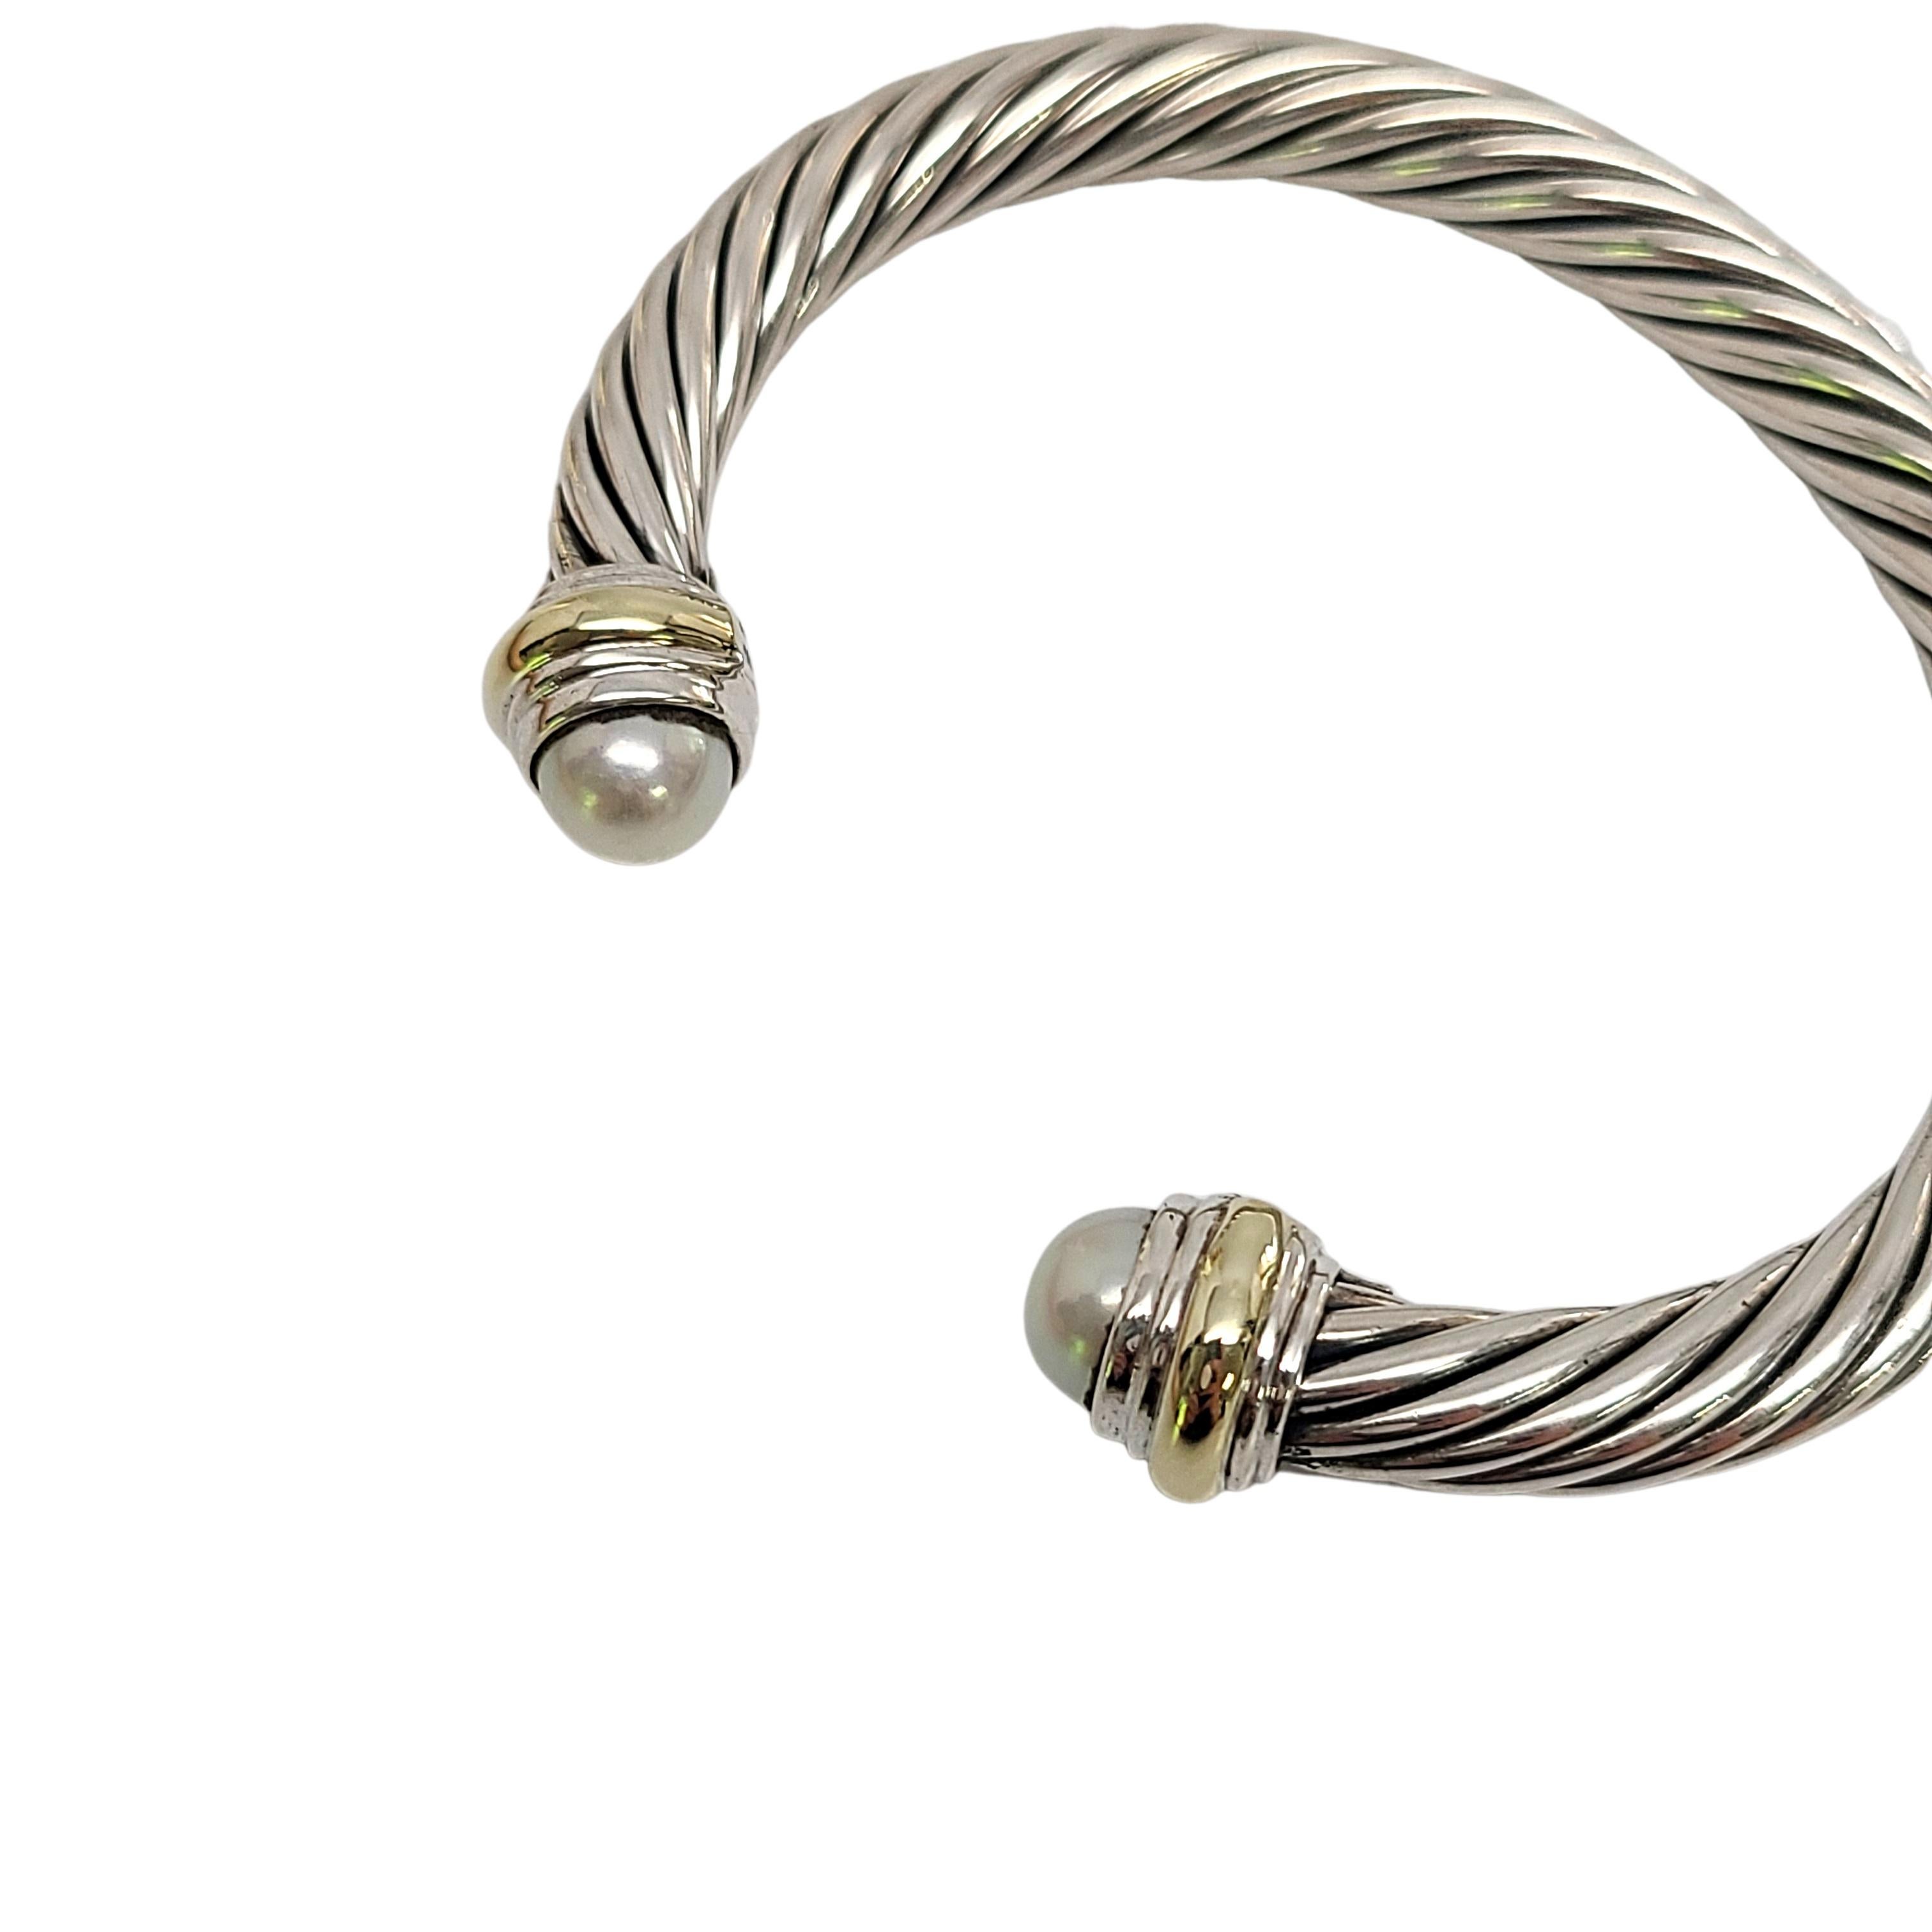 Sterling silver with 14K yellow gold accent and pearl cuff bracelet by designer David Yurman.

Signature sterling silver Cable Classics design accented with 14K yellow gold and a white cultured pearls at each end.

Measures 7mm thick, 6 1/4